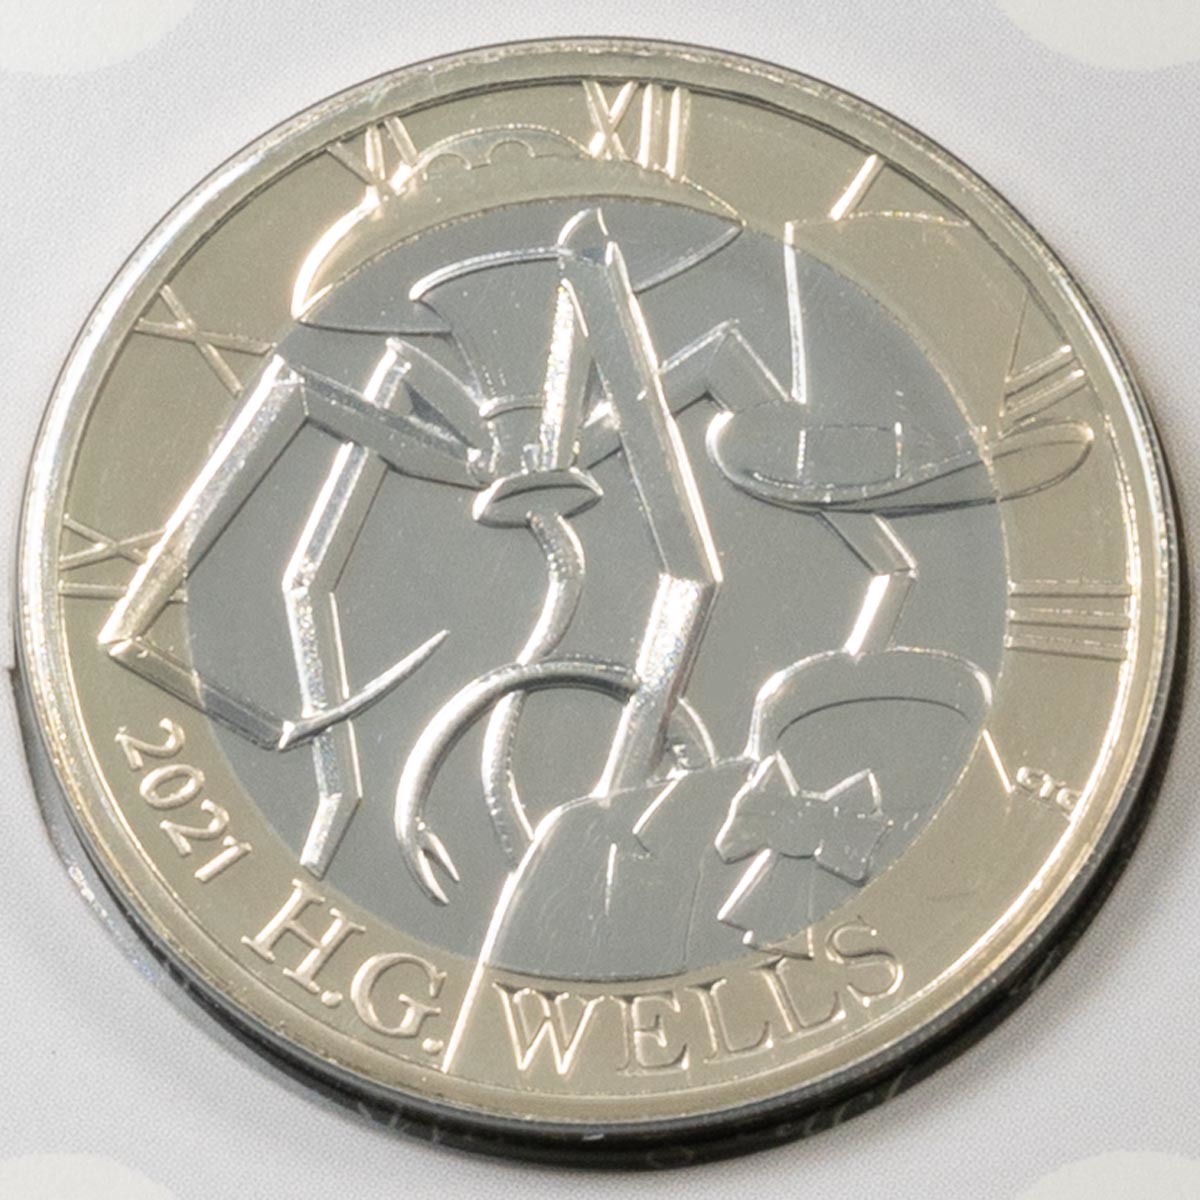 uk21hgbu-2021-h-g-wells-science-fiction-brilliant-uncirculated-cupronickel-uk-two-pound-coin-001-m